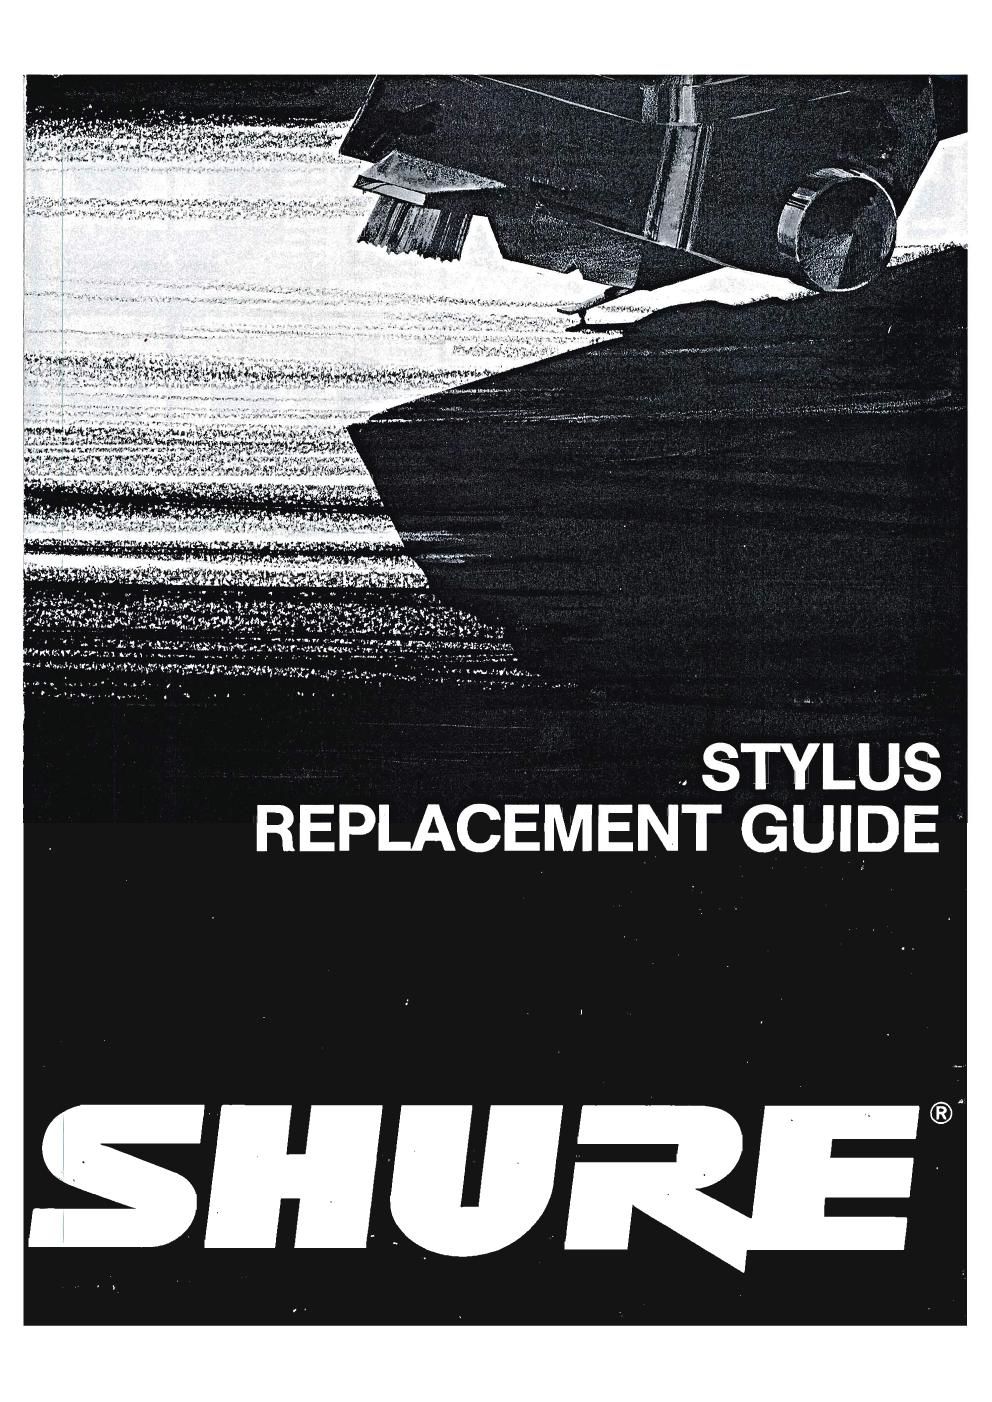 shure stylus replacement guide 1985